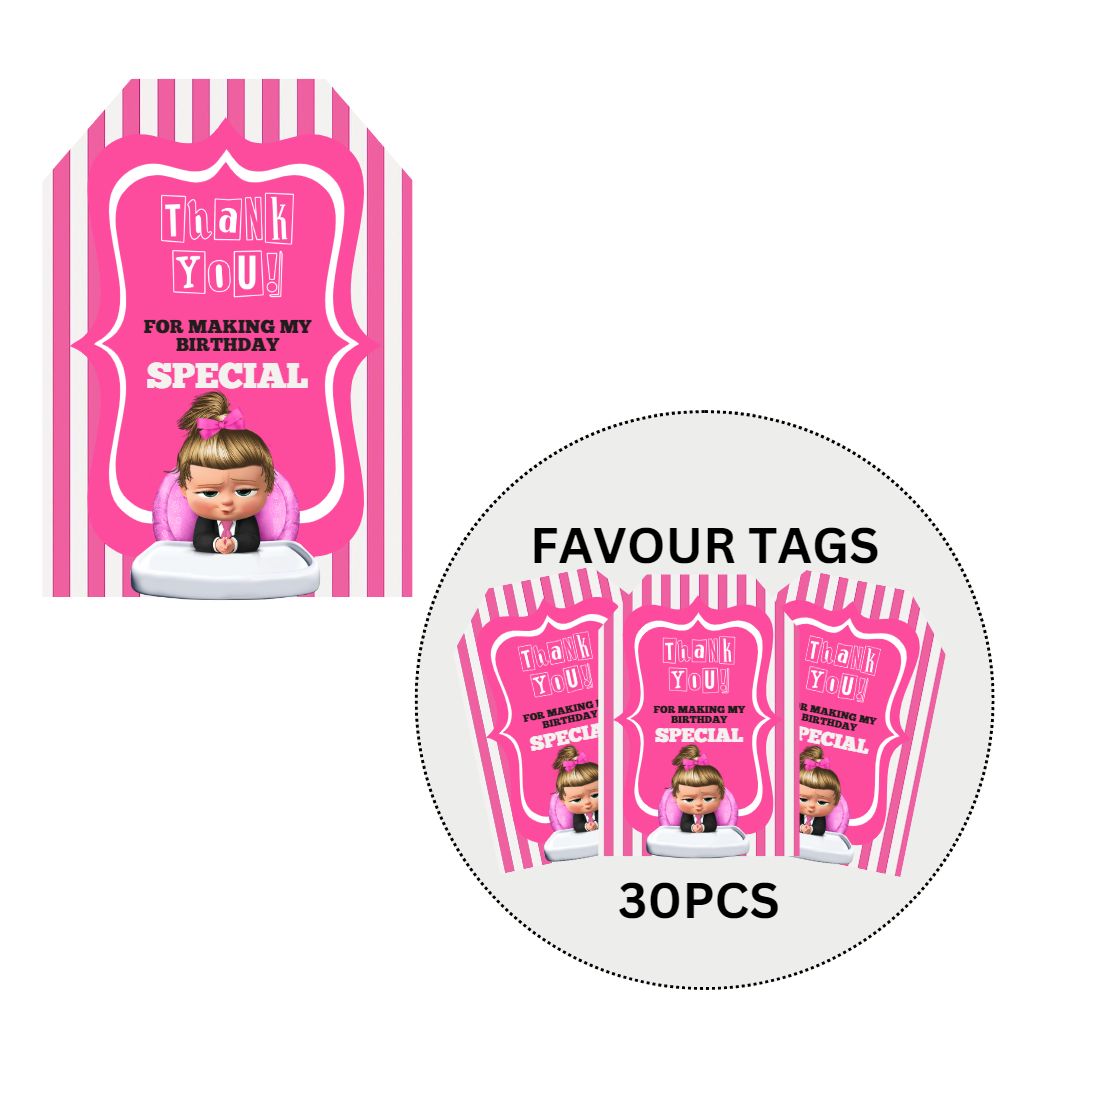 Boss Baby Girl Adventure Birthday Party Decorations - Banner, Cutouts, Favor Tags, Danglers (6 inches/250 GSM Cardstock/Mixcolour/61Pcs)